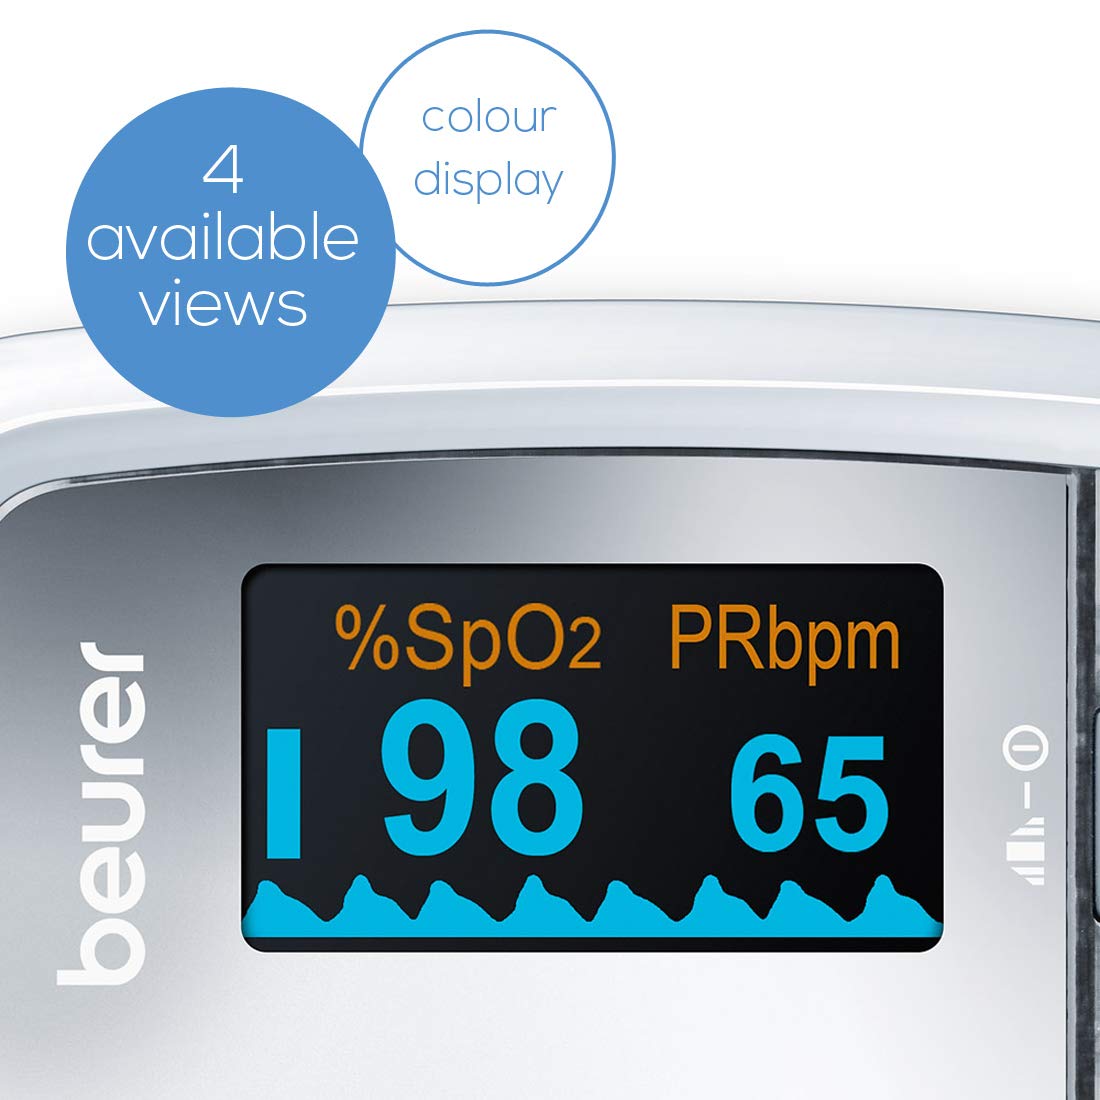 Beurer PO30 Pulse Oximeter, Blood Oxygen Saturation & Heart Rate Monitor, 5 Years Warranty - Grey